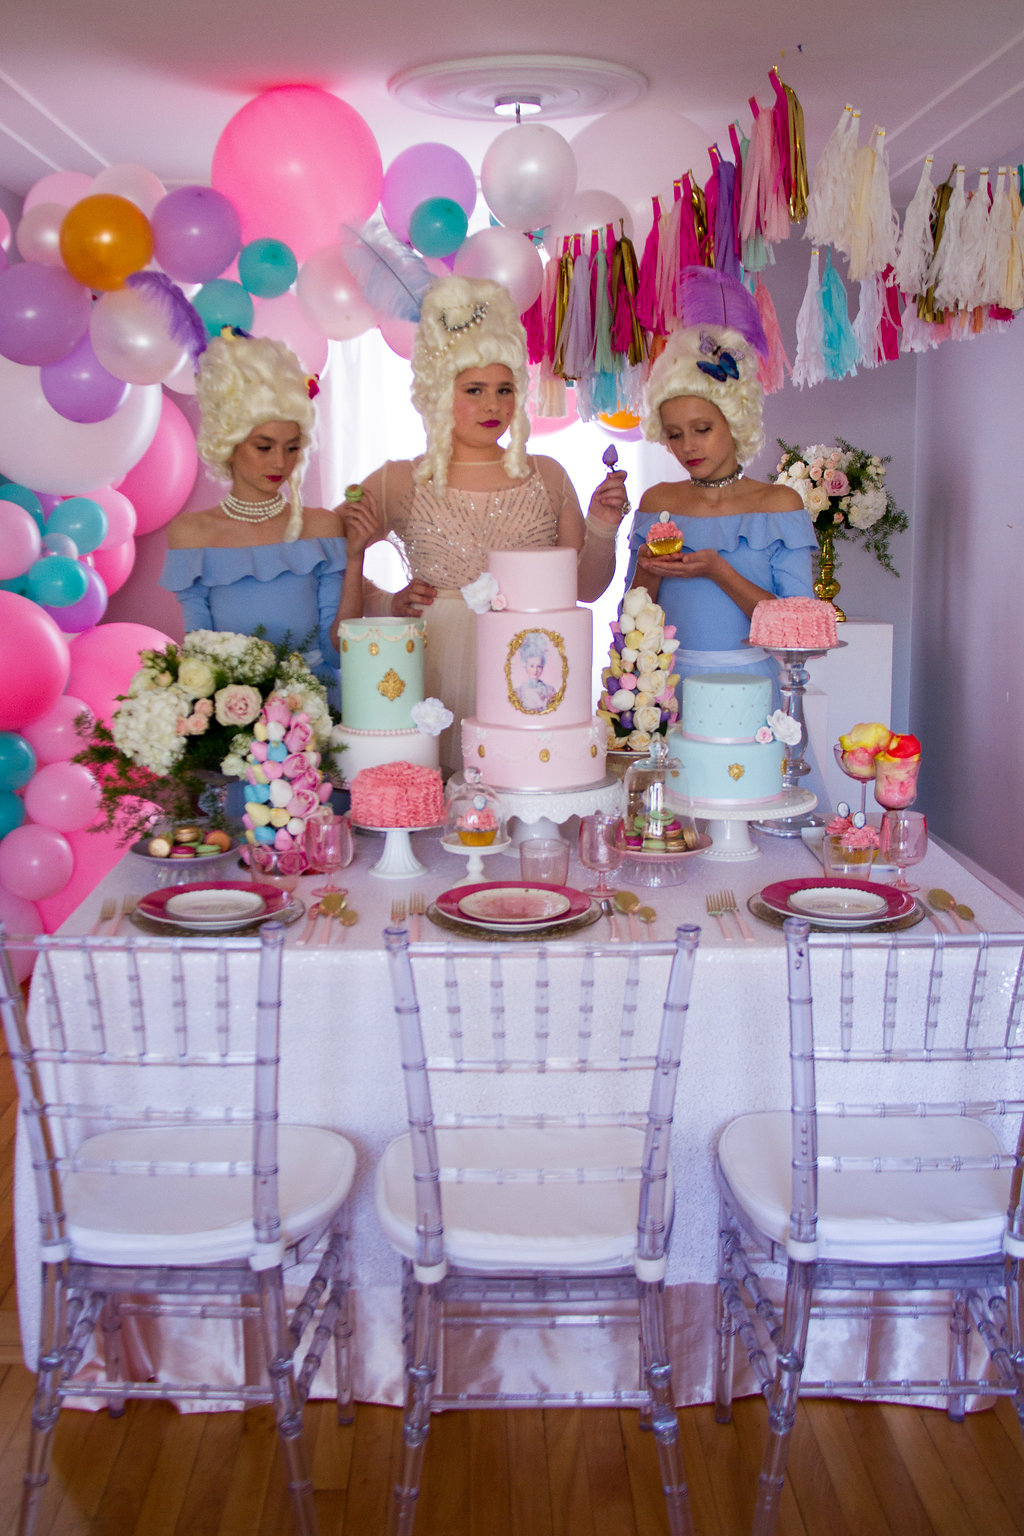 Marie Antoinette Party - Birthday Party Ideas for Kids